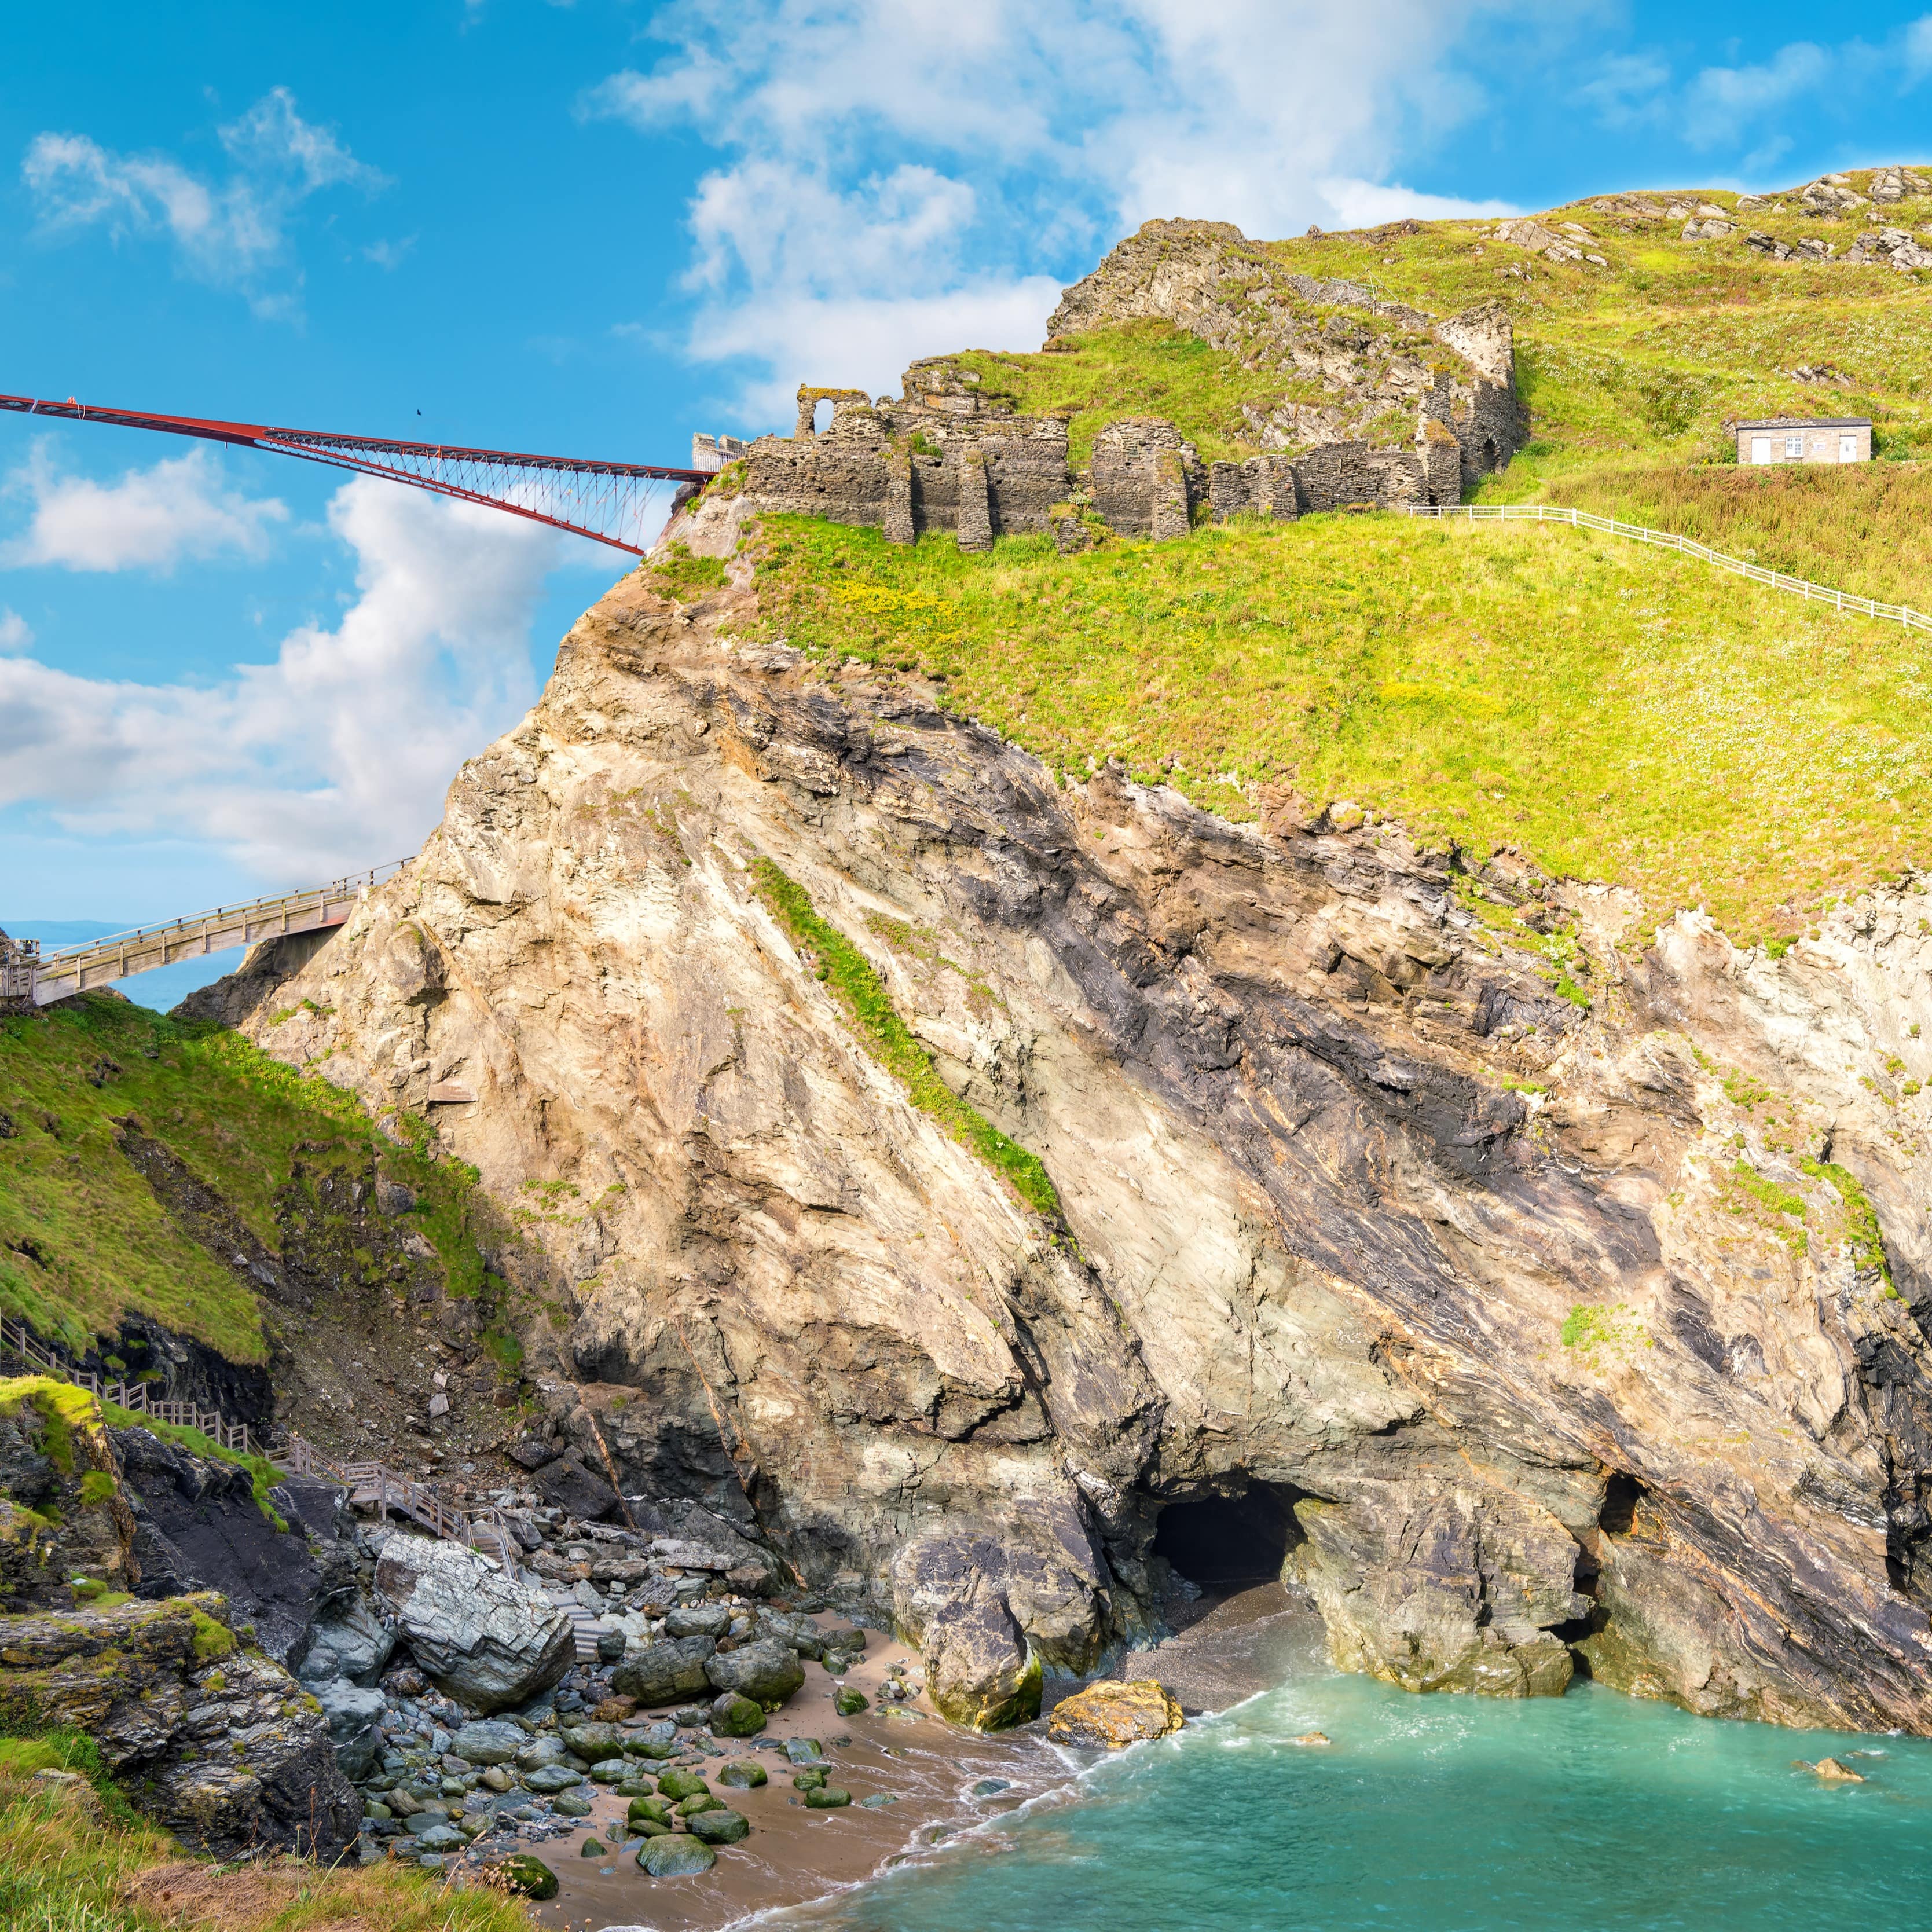 View to Tintagel island, the legendary Tintagel castle ruins and Merlin's cave